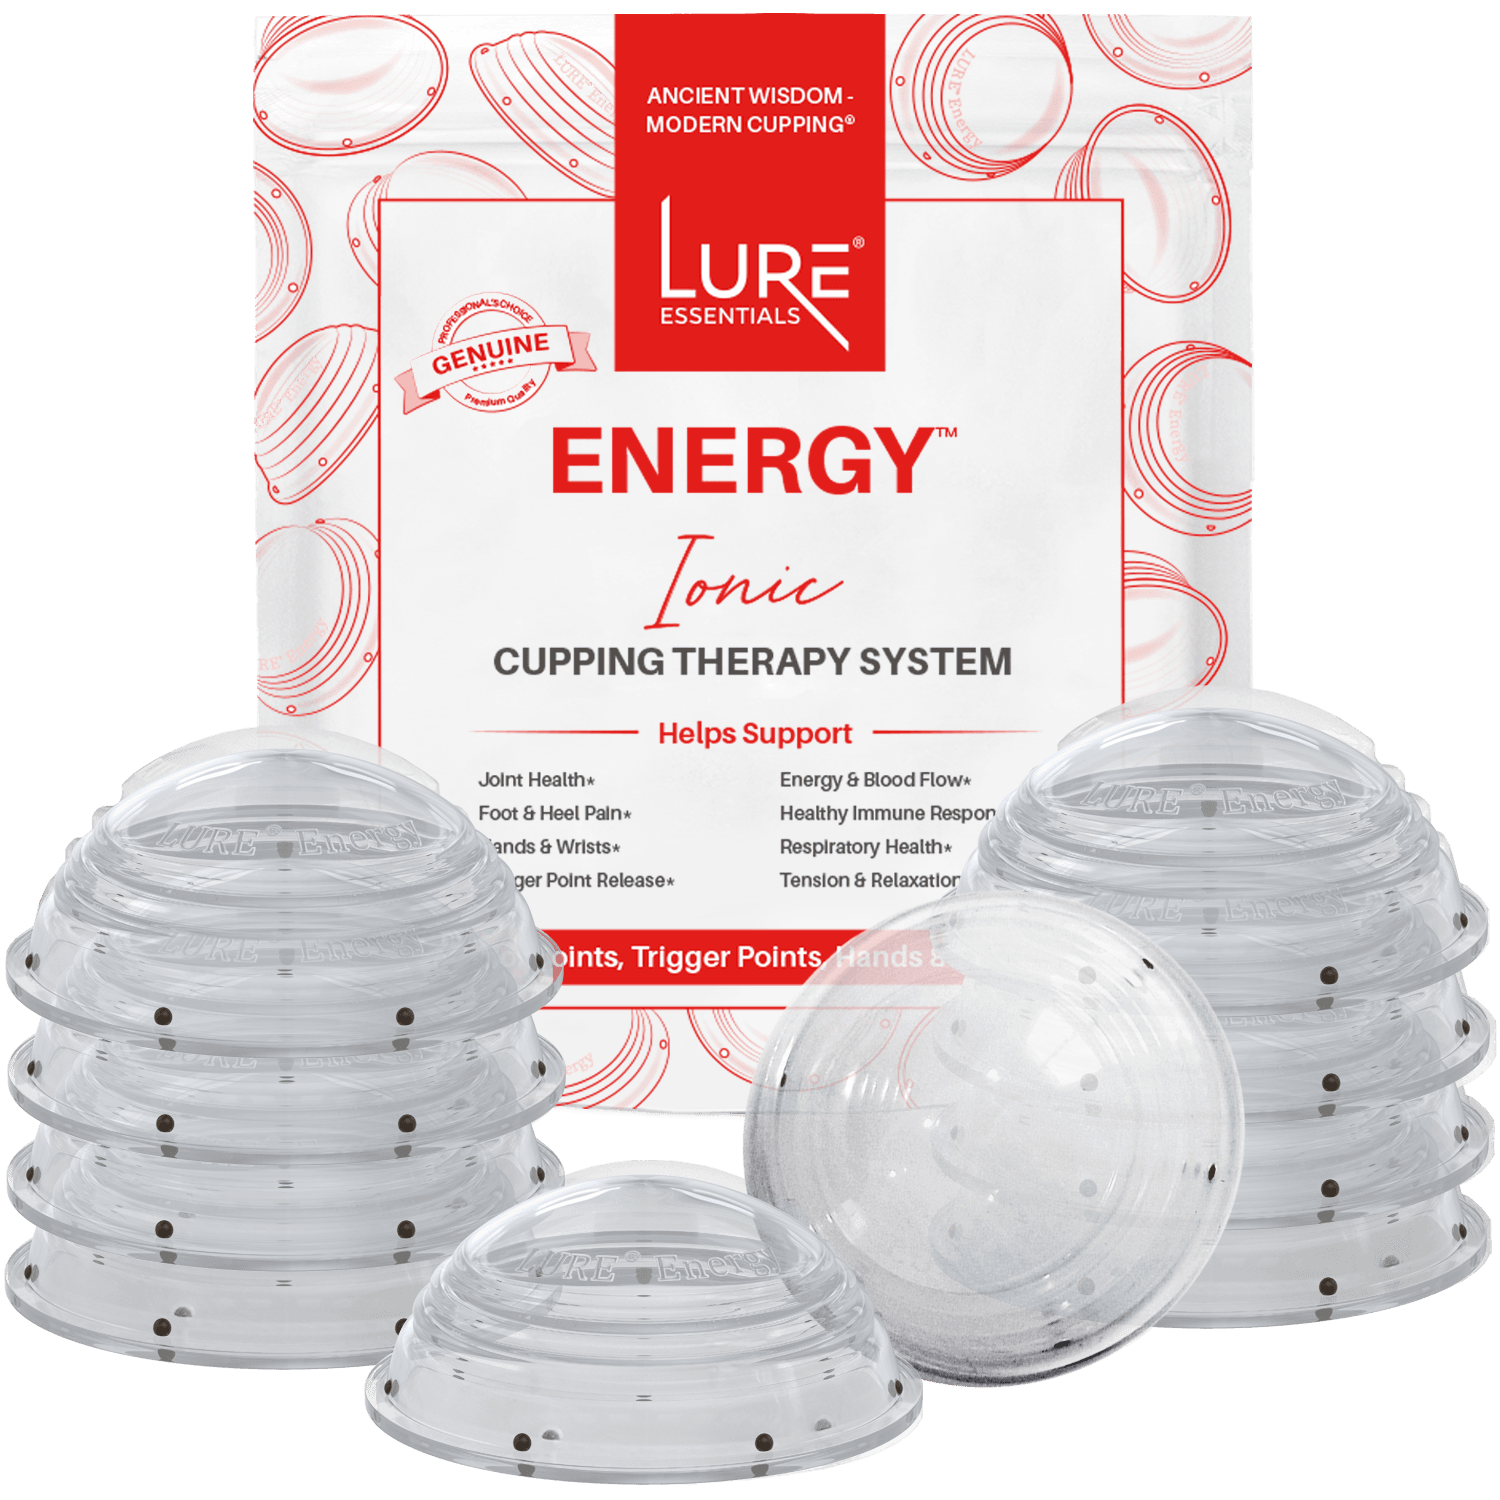 Lure Home Spa Ionic Energy Cupping Therapy Sets – Silicone Cups for Cupping Trigger Points, Joints, Arthritis, Plantar Fasciitis and Other Foot